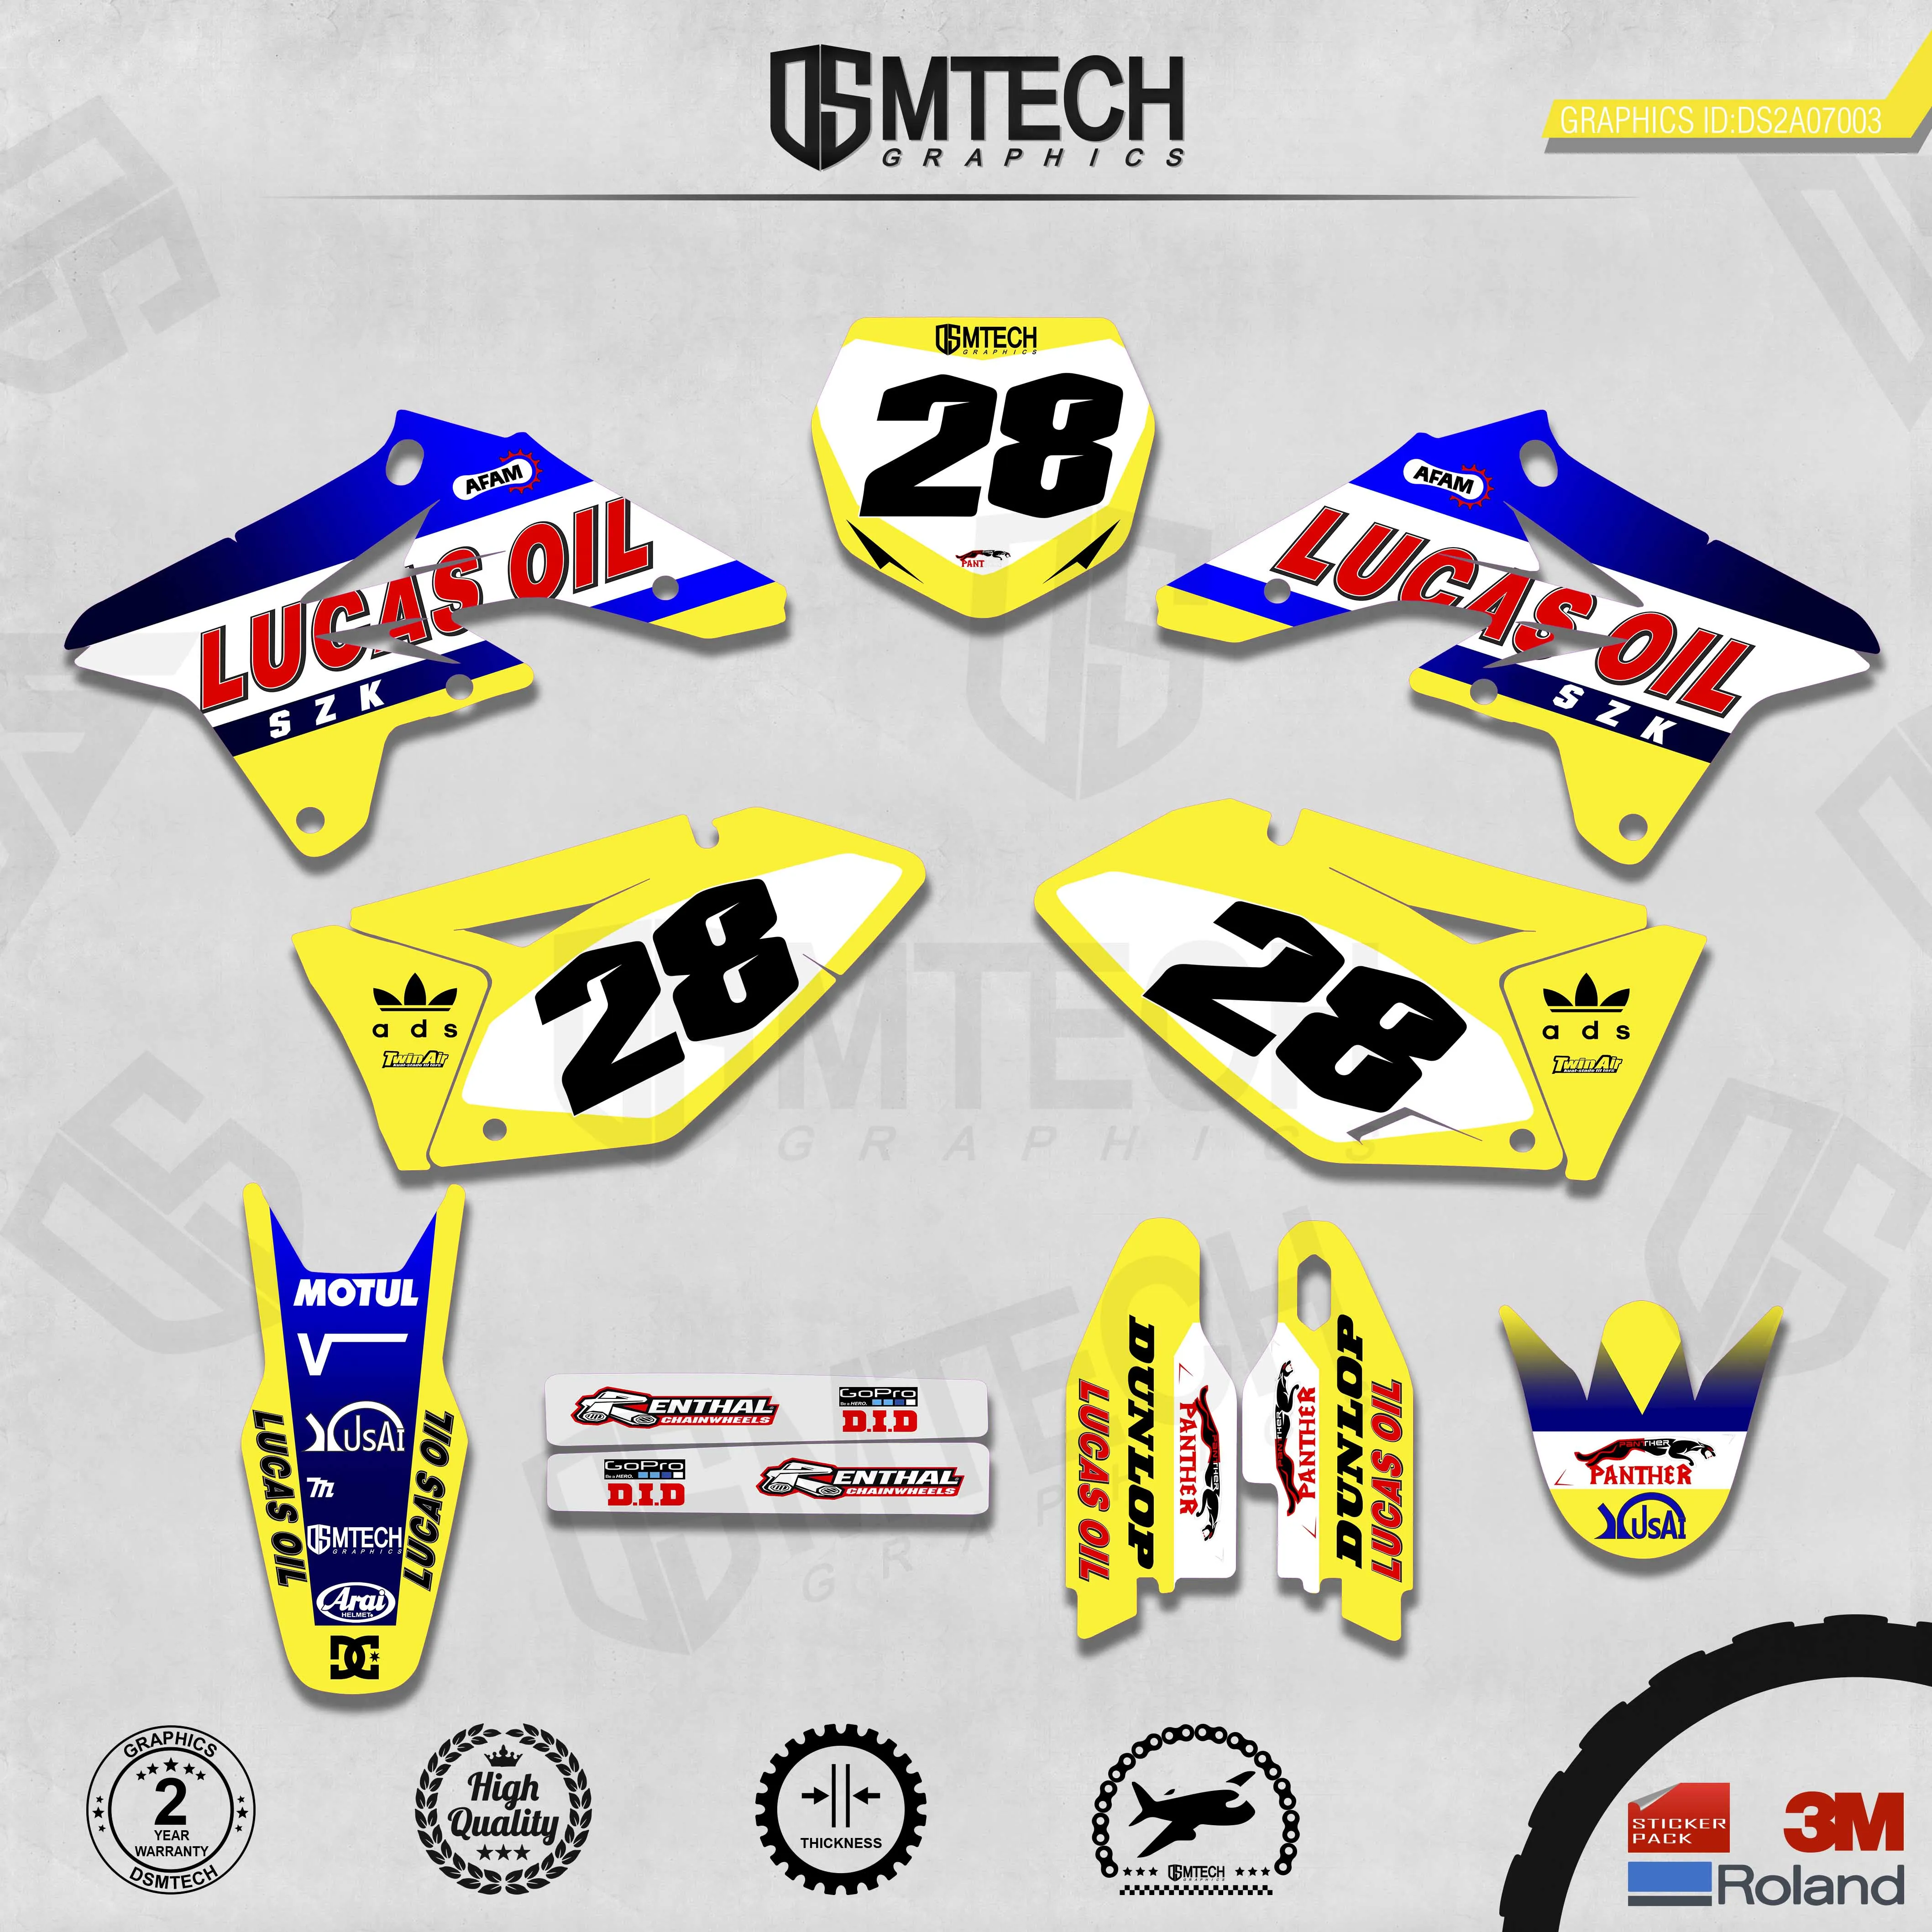 DSMTECH Customized Team Graphics Backgrounds Decals 3M Custom Stickers For 2007-2009 RMZ250  003